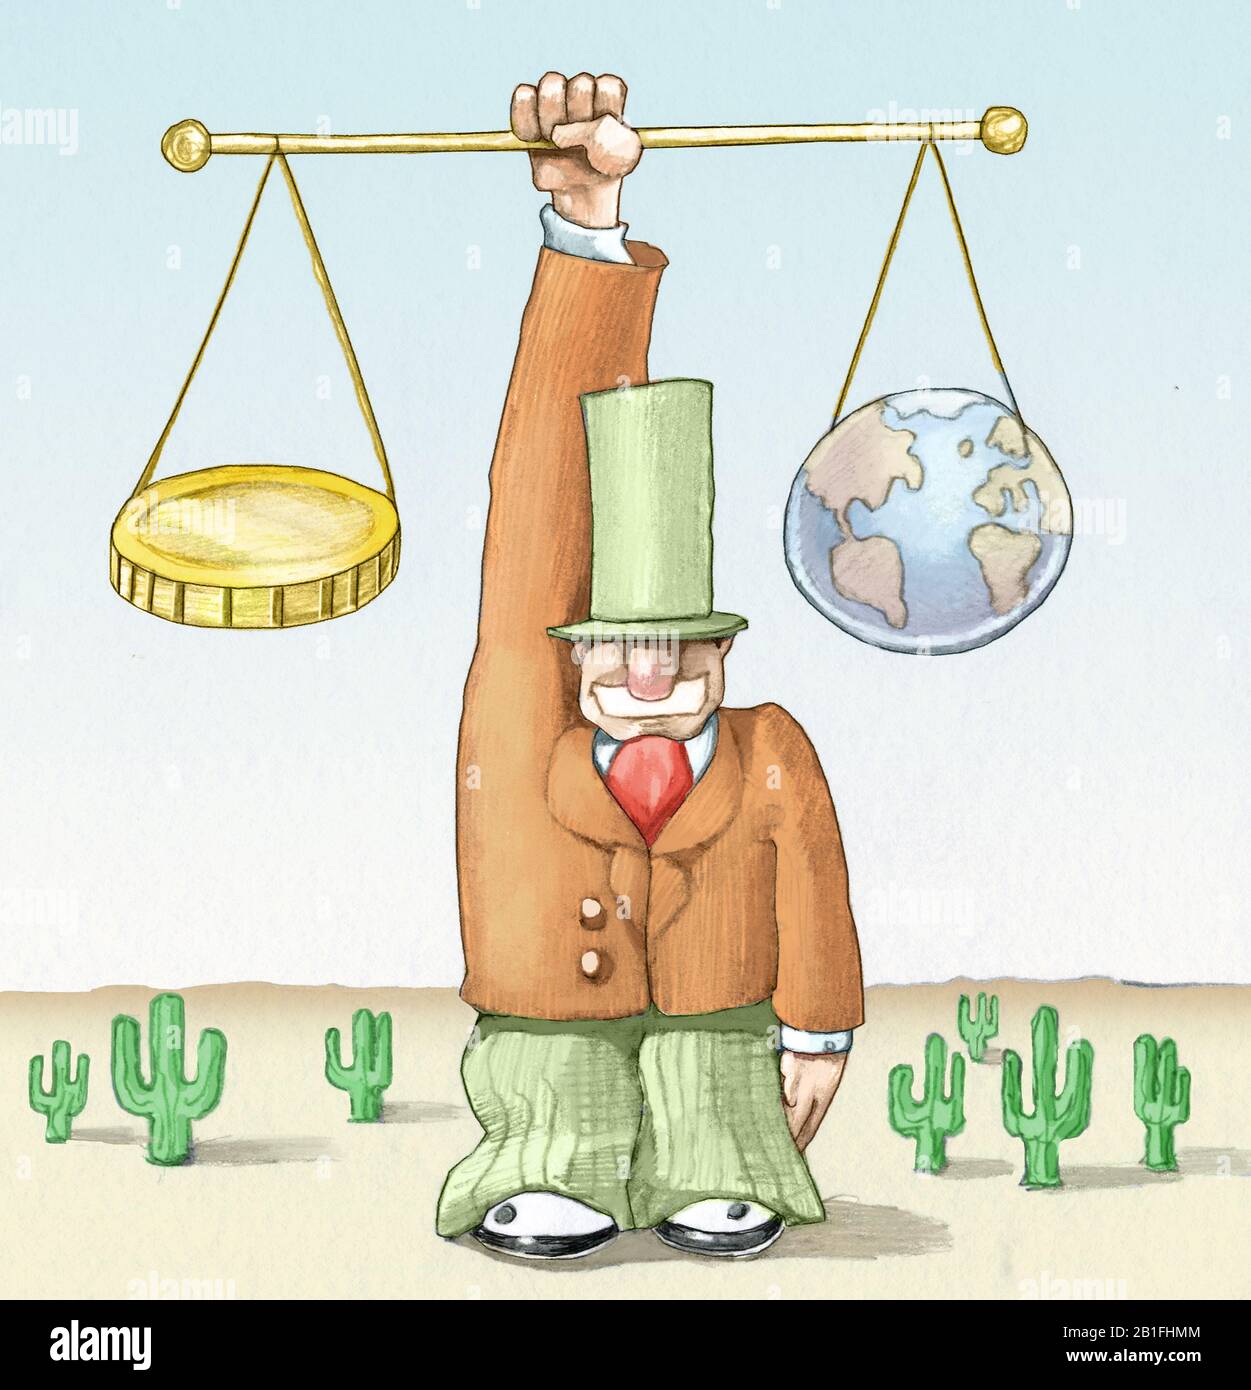 banker holds a balance a scale is a coin the other is the world the desert arround him allegory of the power that money has over the world Stock Photo